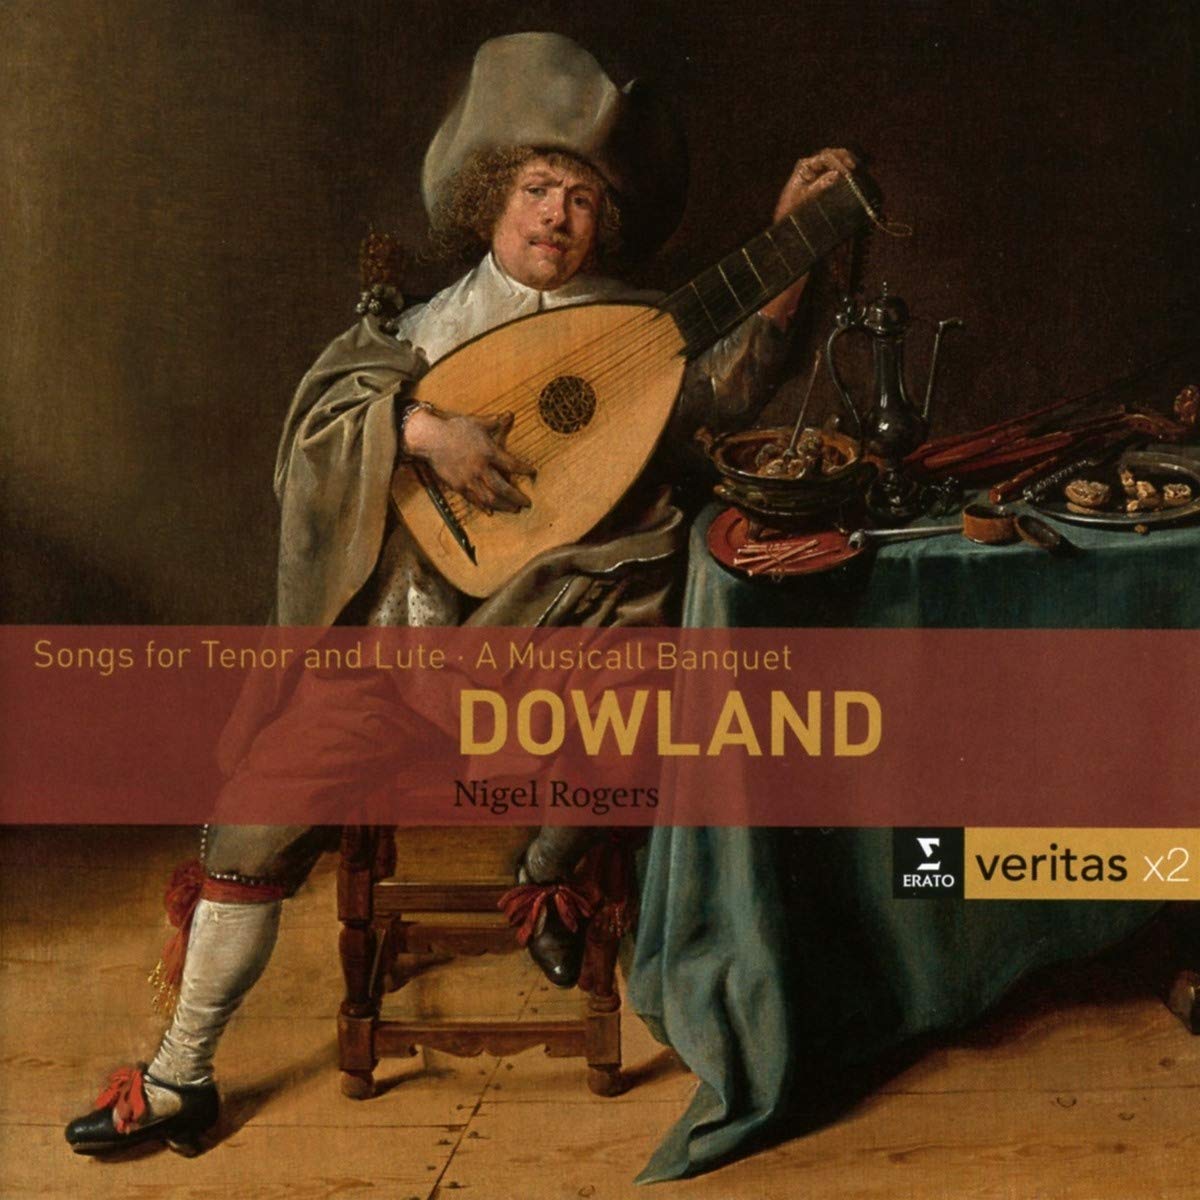 Dowland: Songs for tenor and luth / A Musicall Banquet | Nigel Rogers